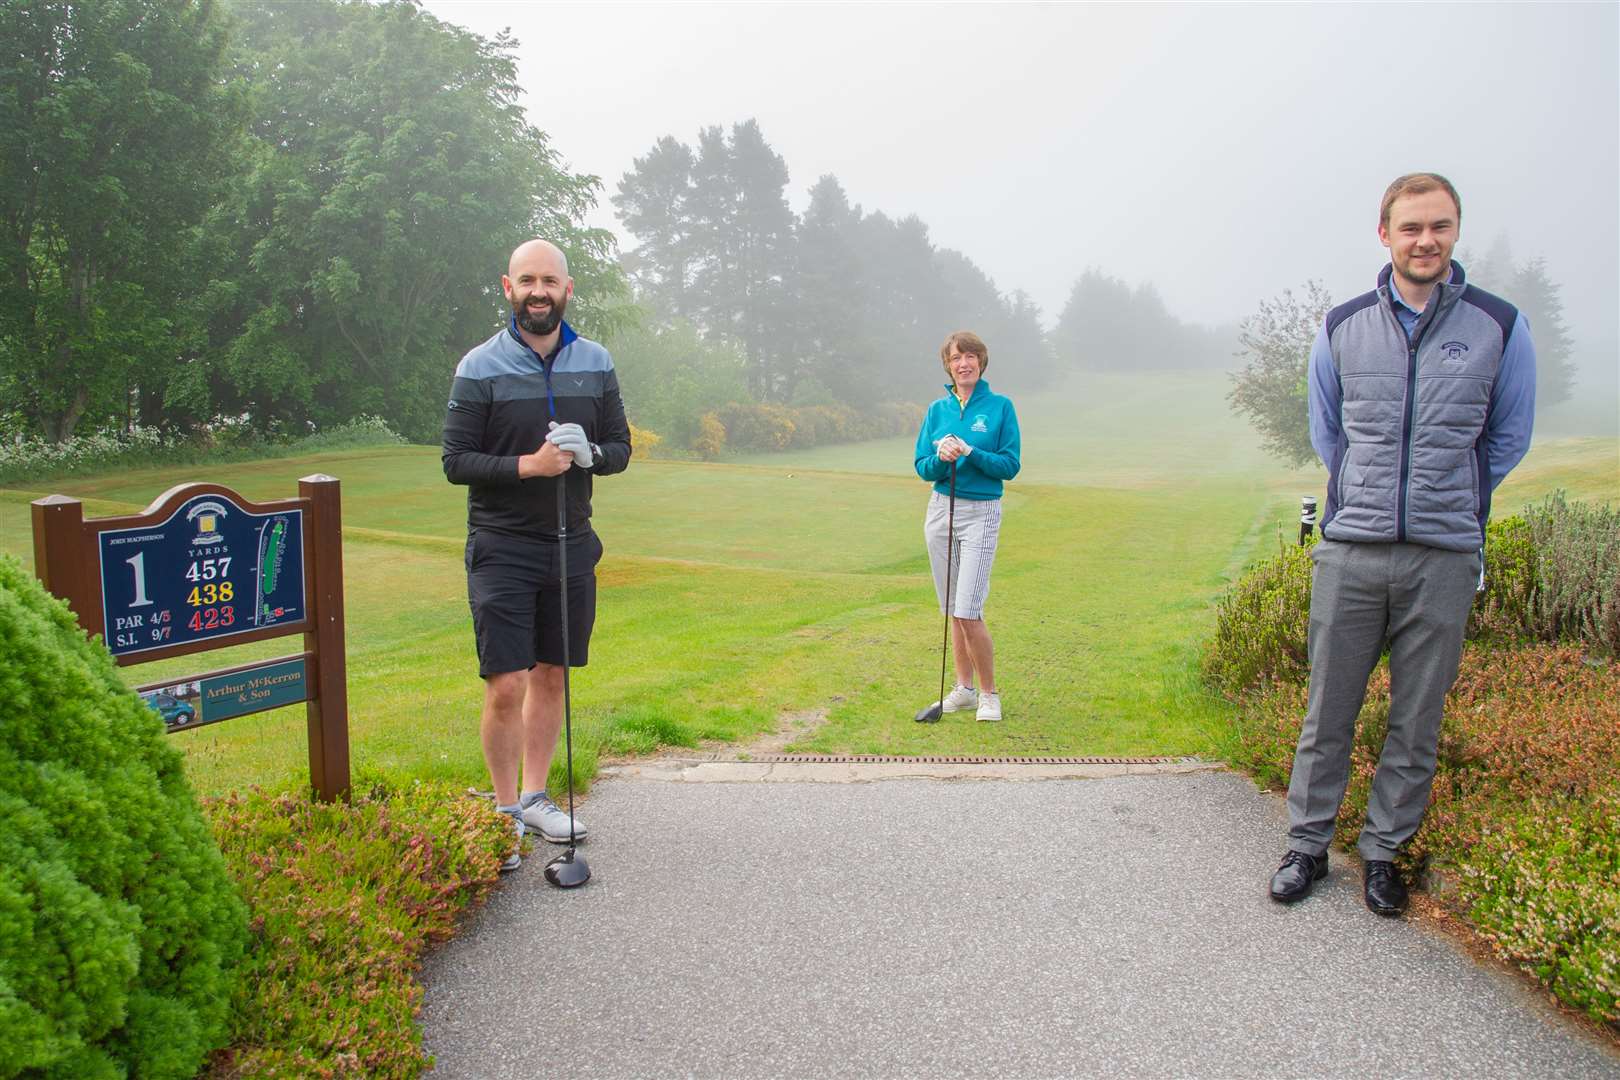 The first hit since lockdown. Elgin Golf Club professional Michael McAllan, club captain Marian Evans and club manager John Duguid celebrate the reopening after more than two months of shutdown. Picture: Daniel Forsyth..